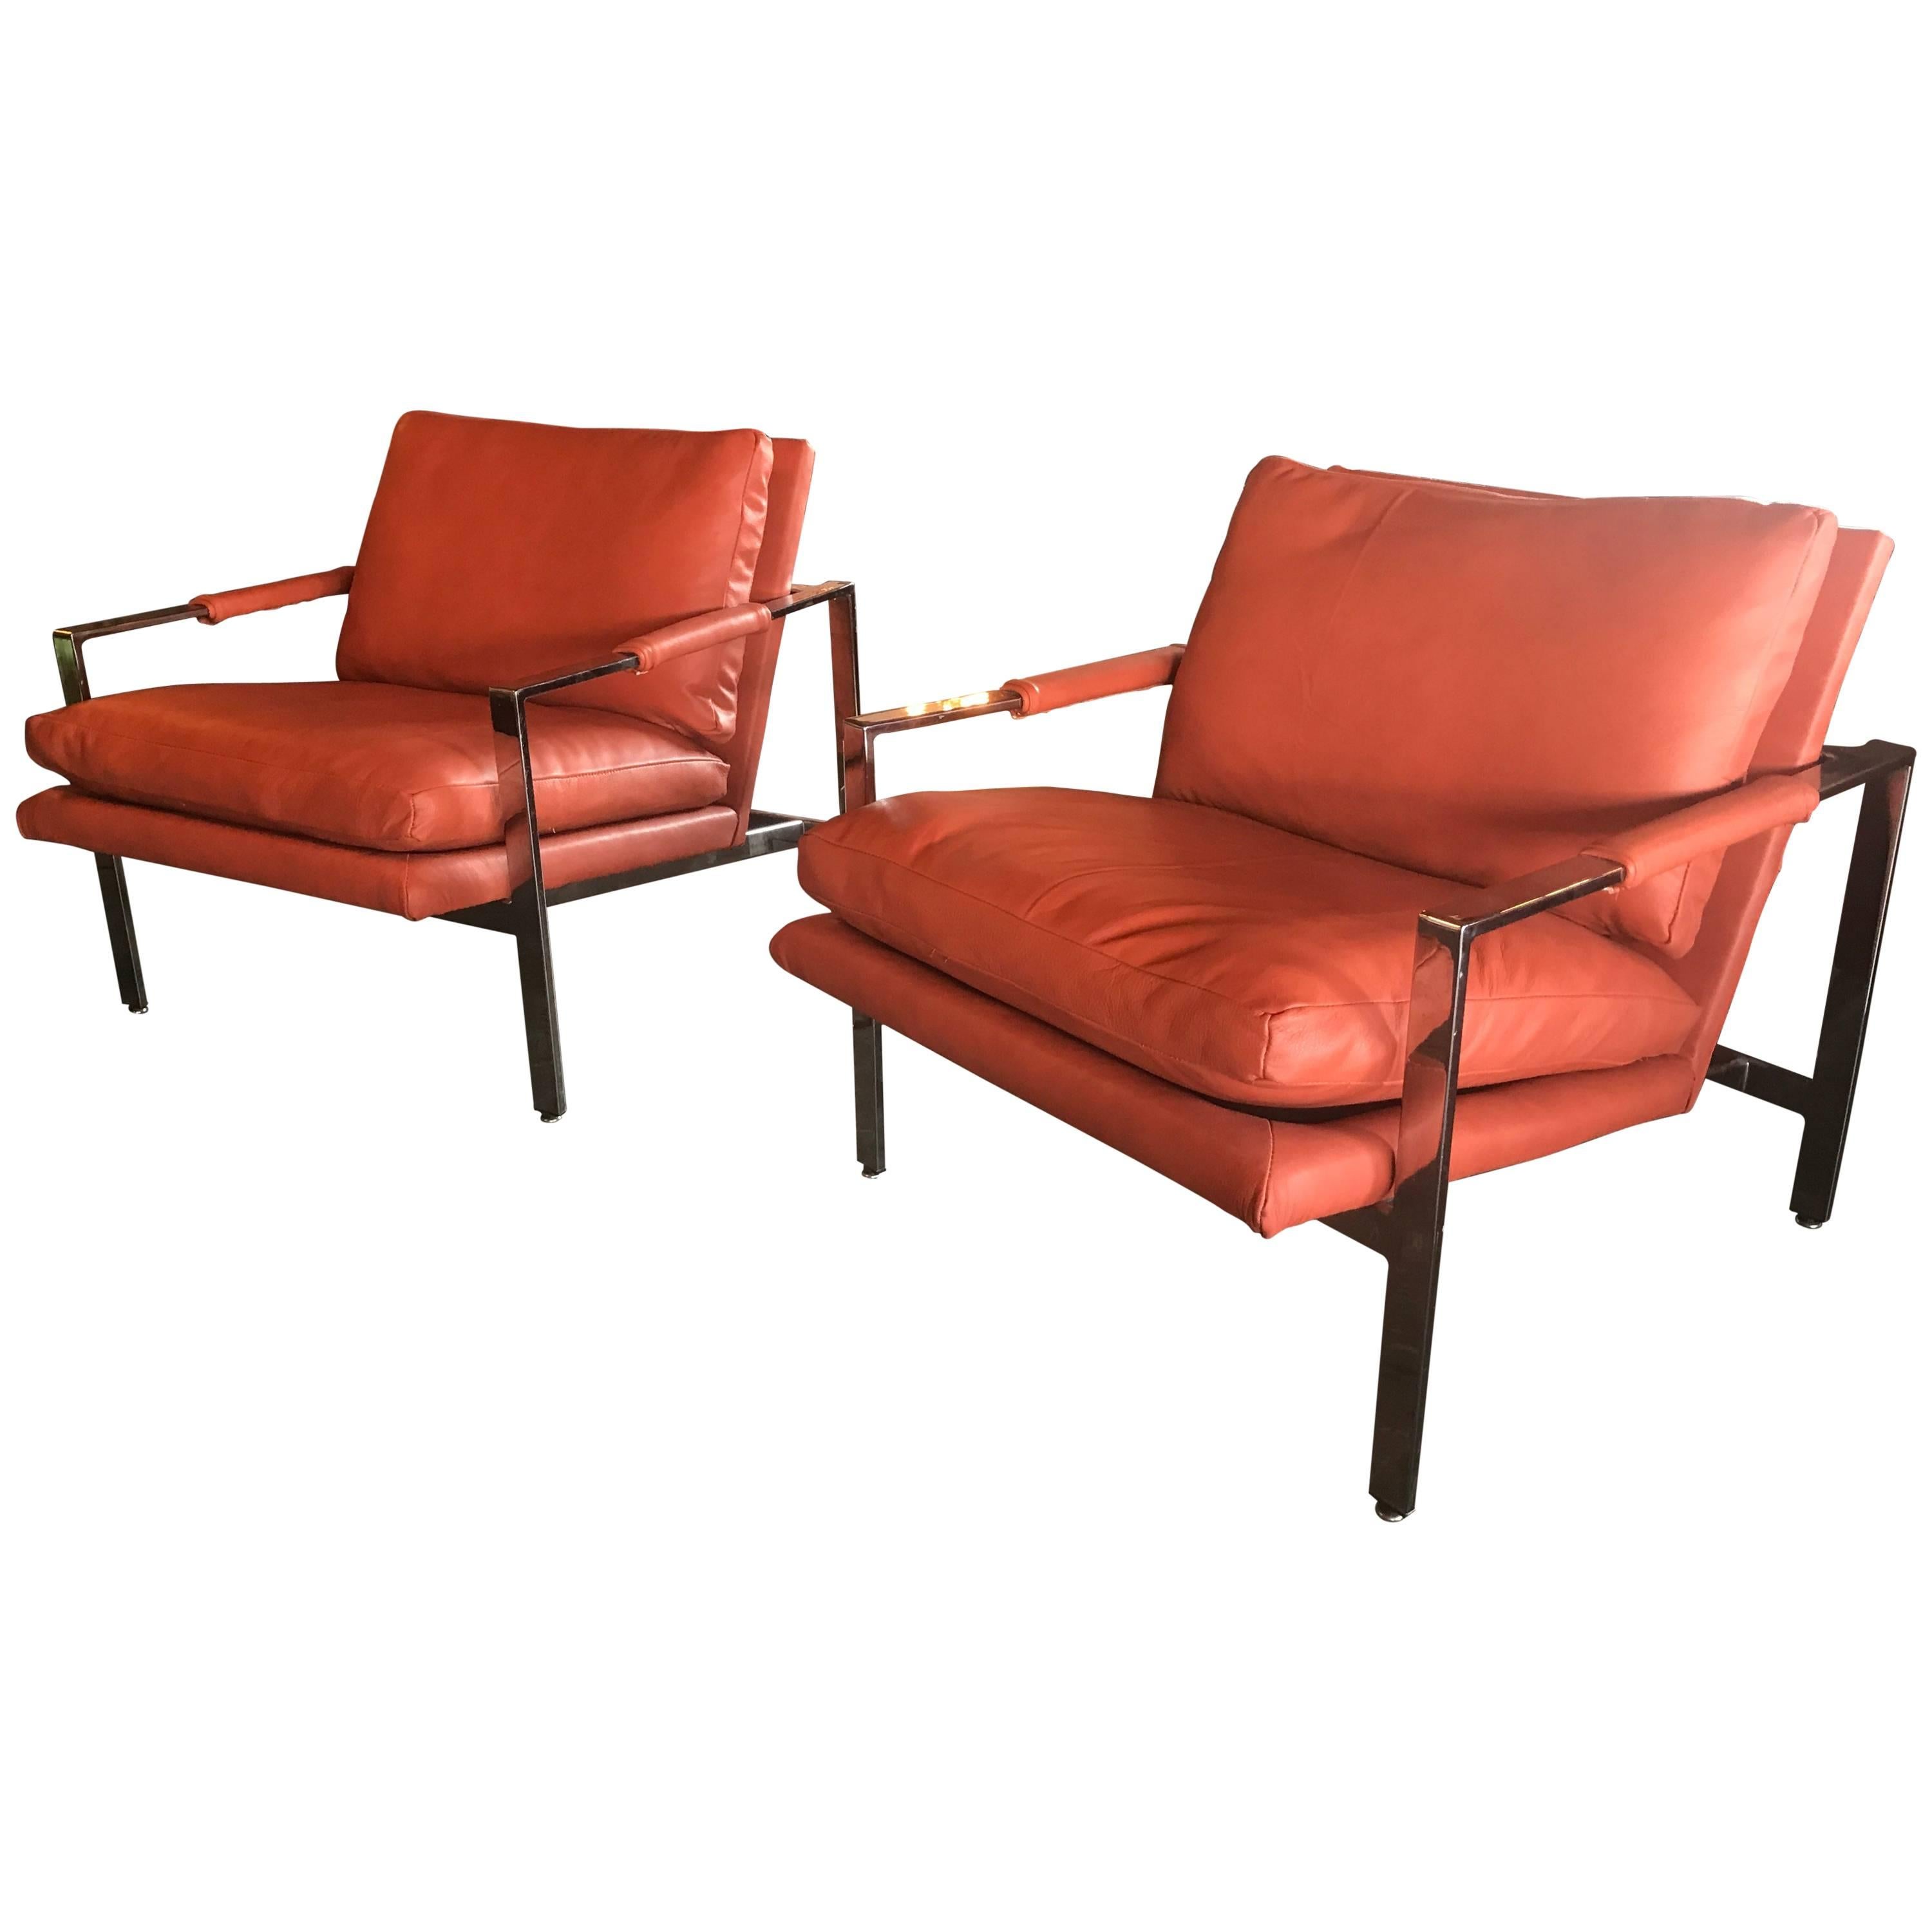 Milo Baughman Thayer Coggin Chrome Lounge Chairs in Leather